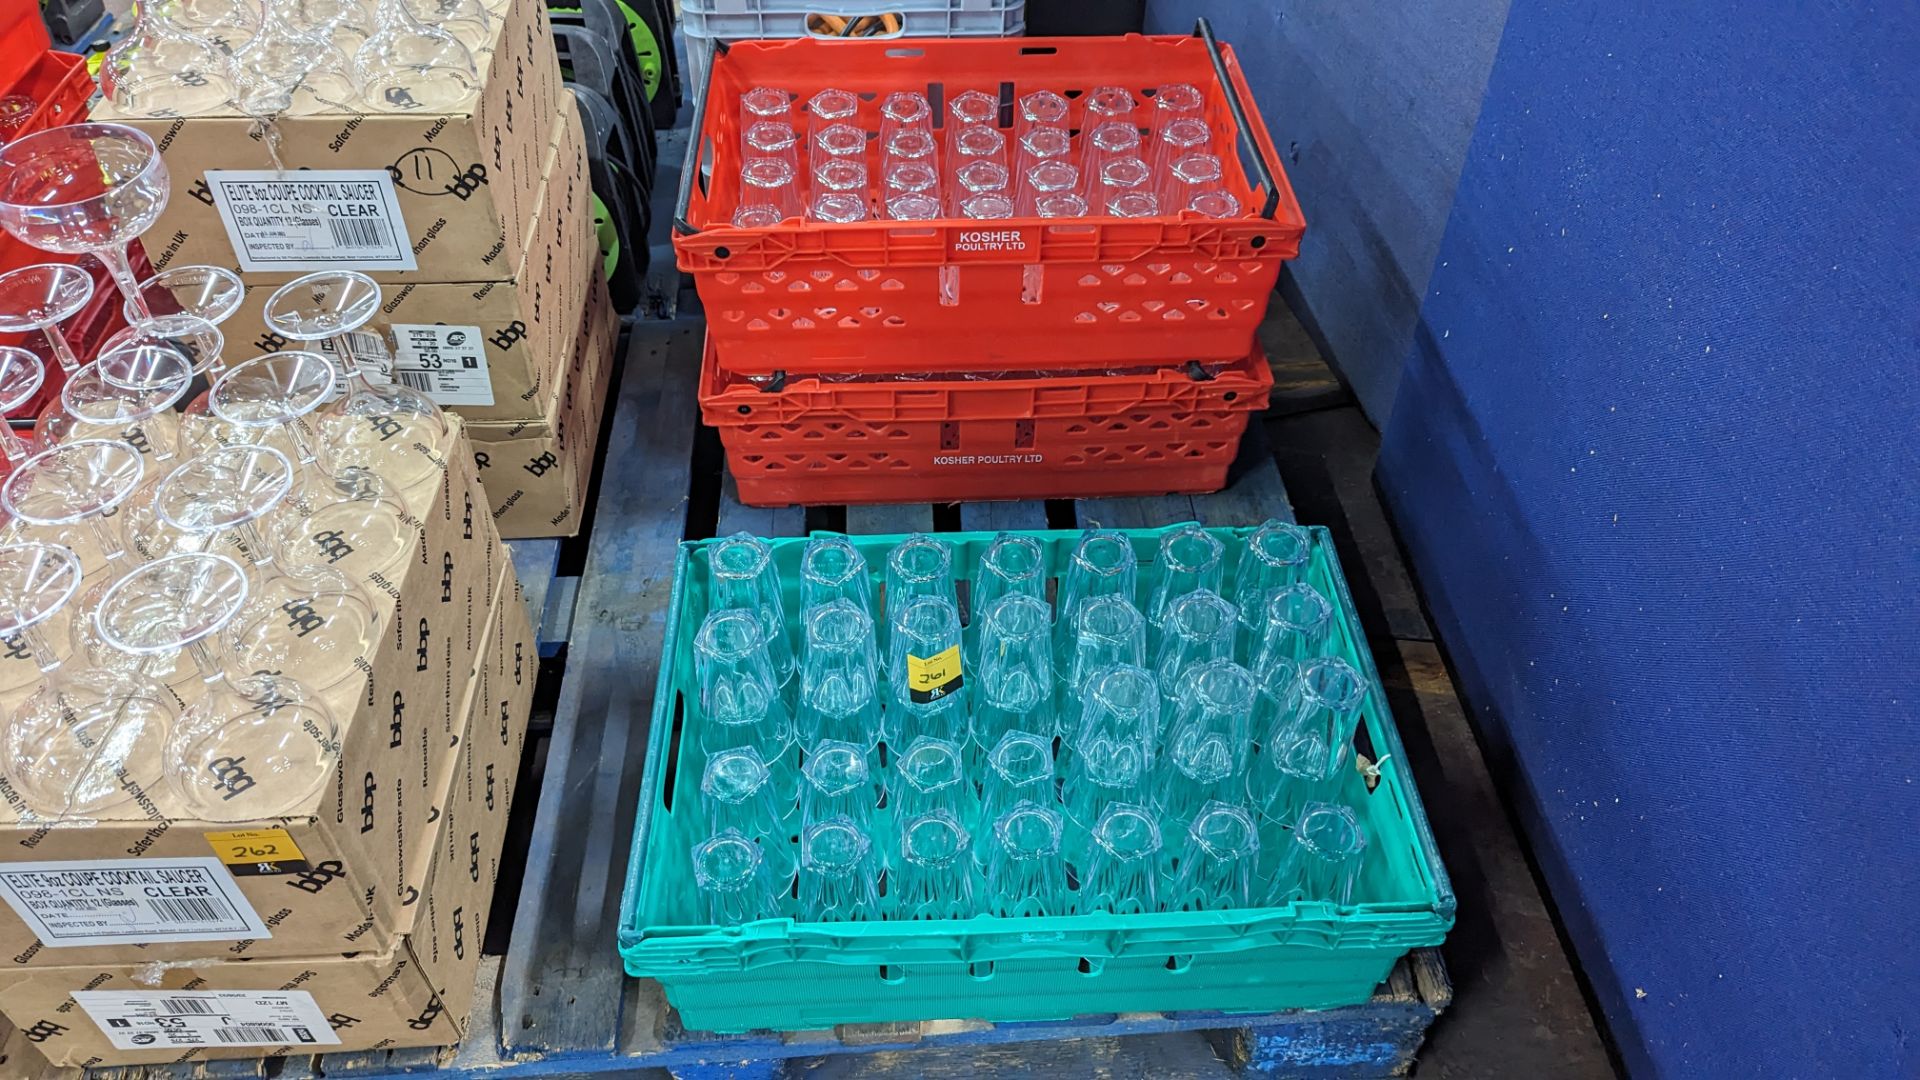 100 off plastic reusable tumblers - the contents of 3 crates - Image 2 of 7